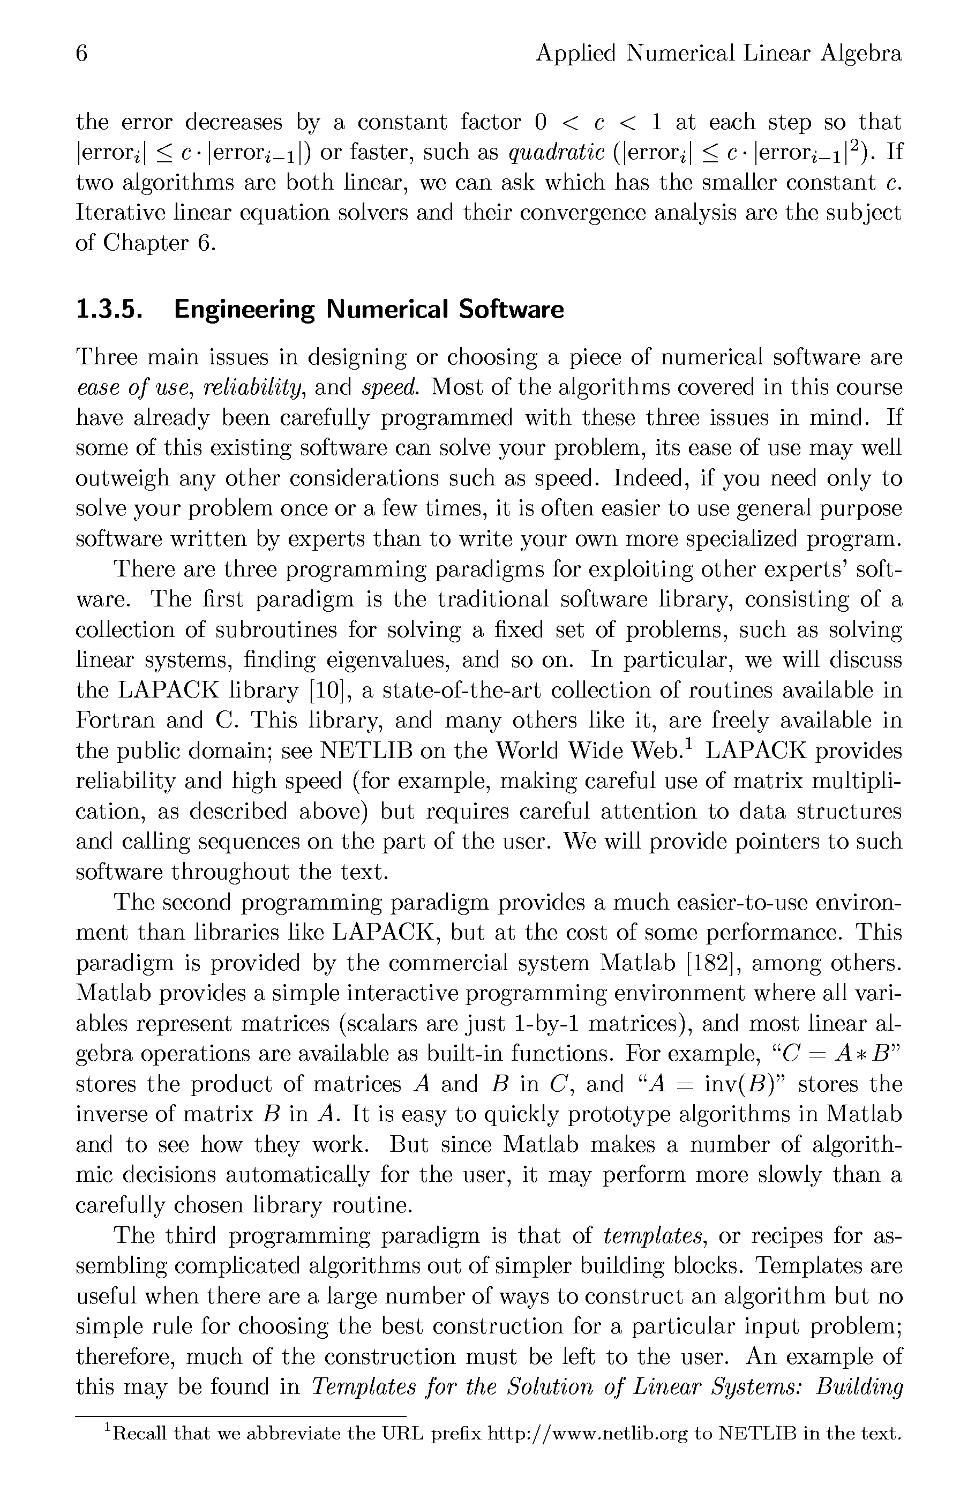 1.3.5 Engineering Numerical Software